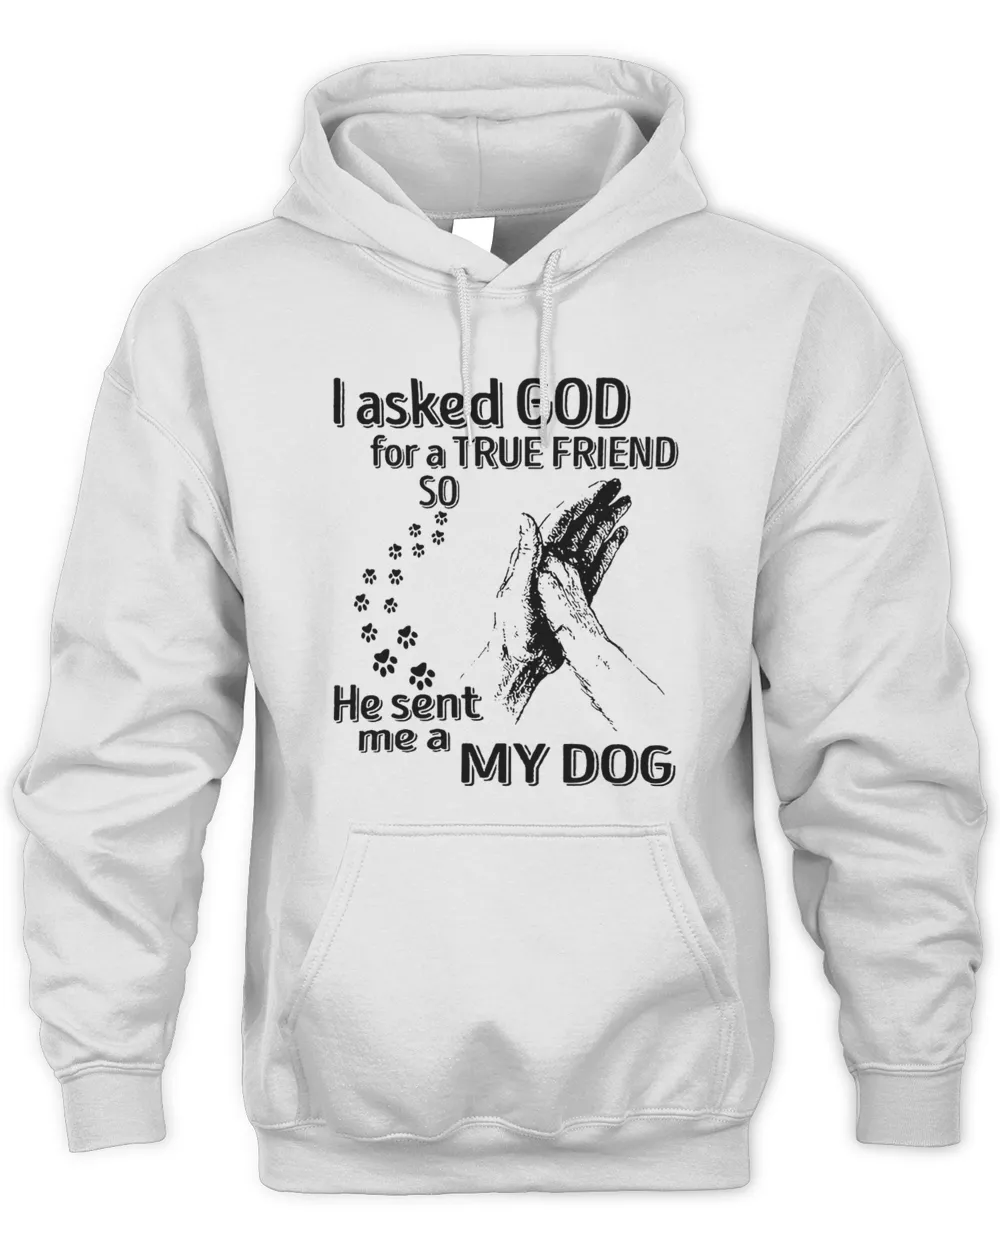 I Asked God For A True Friend so he sent me a My dog